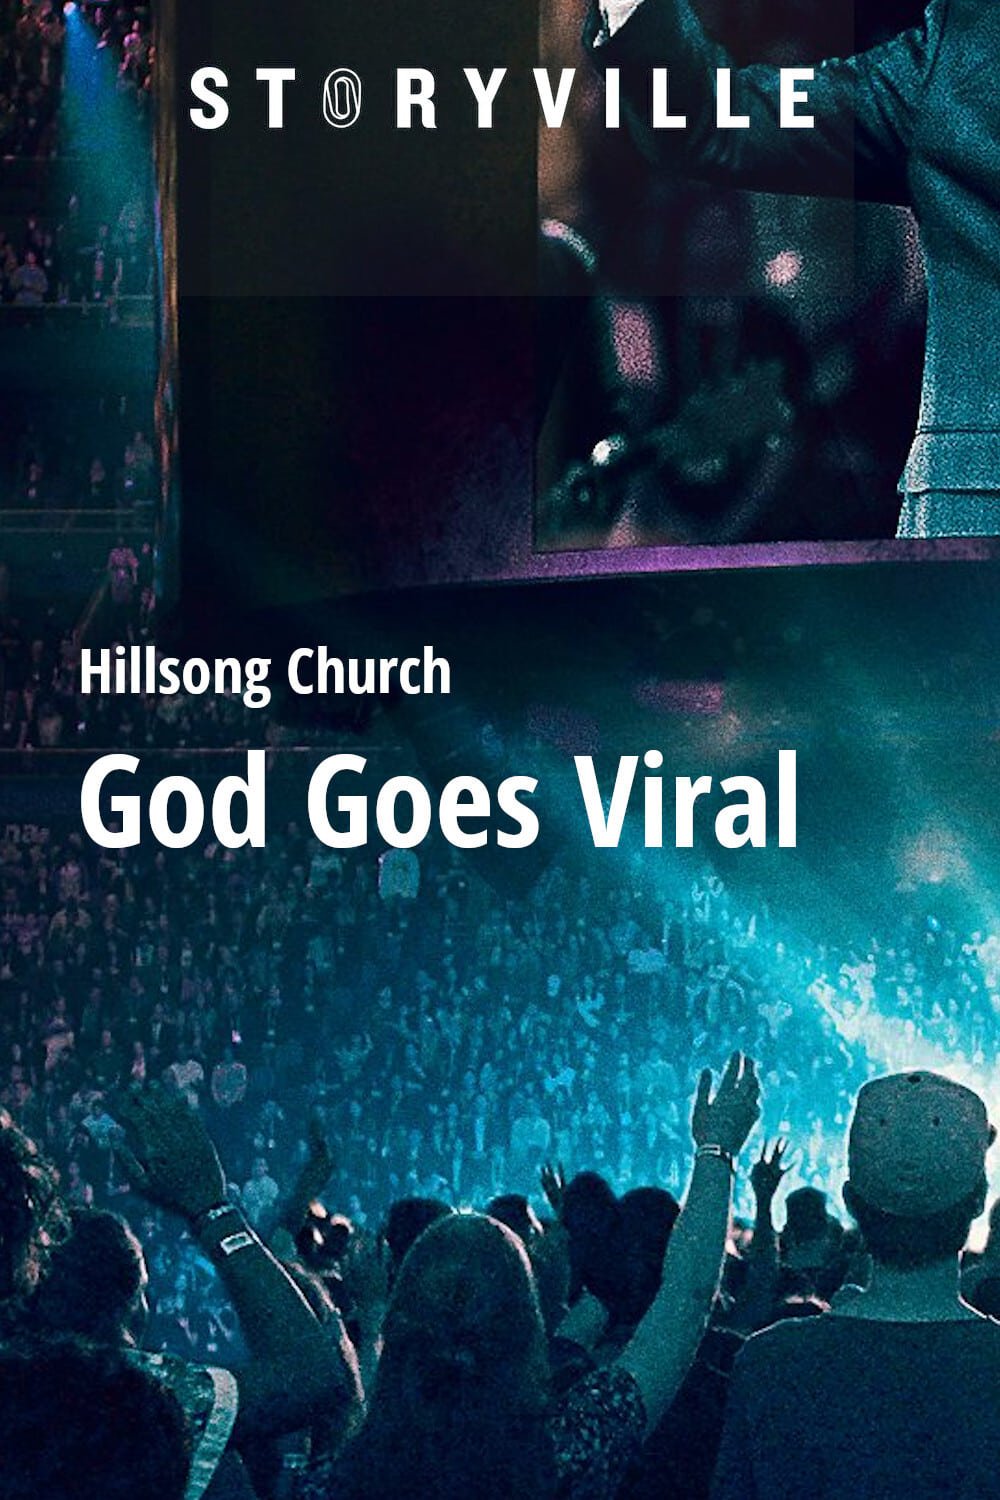 Poster of the movie Hillsong Church: God Goes Viral